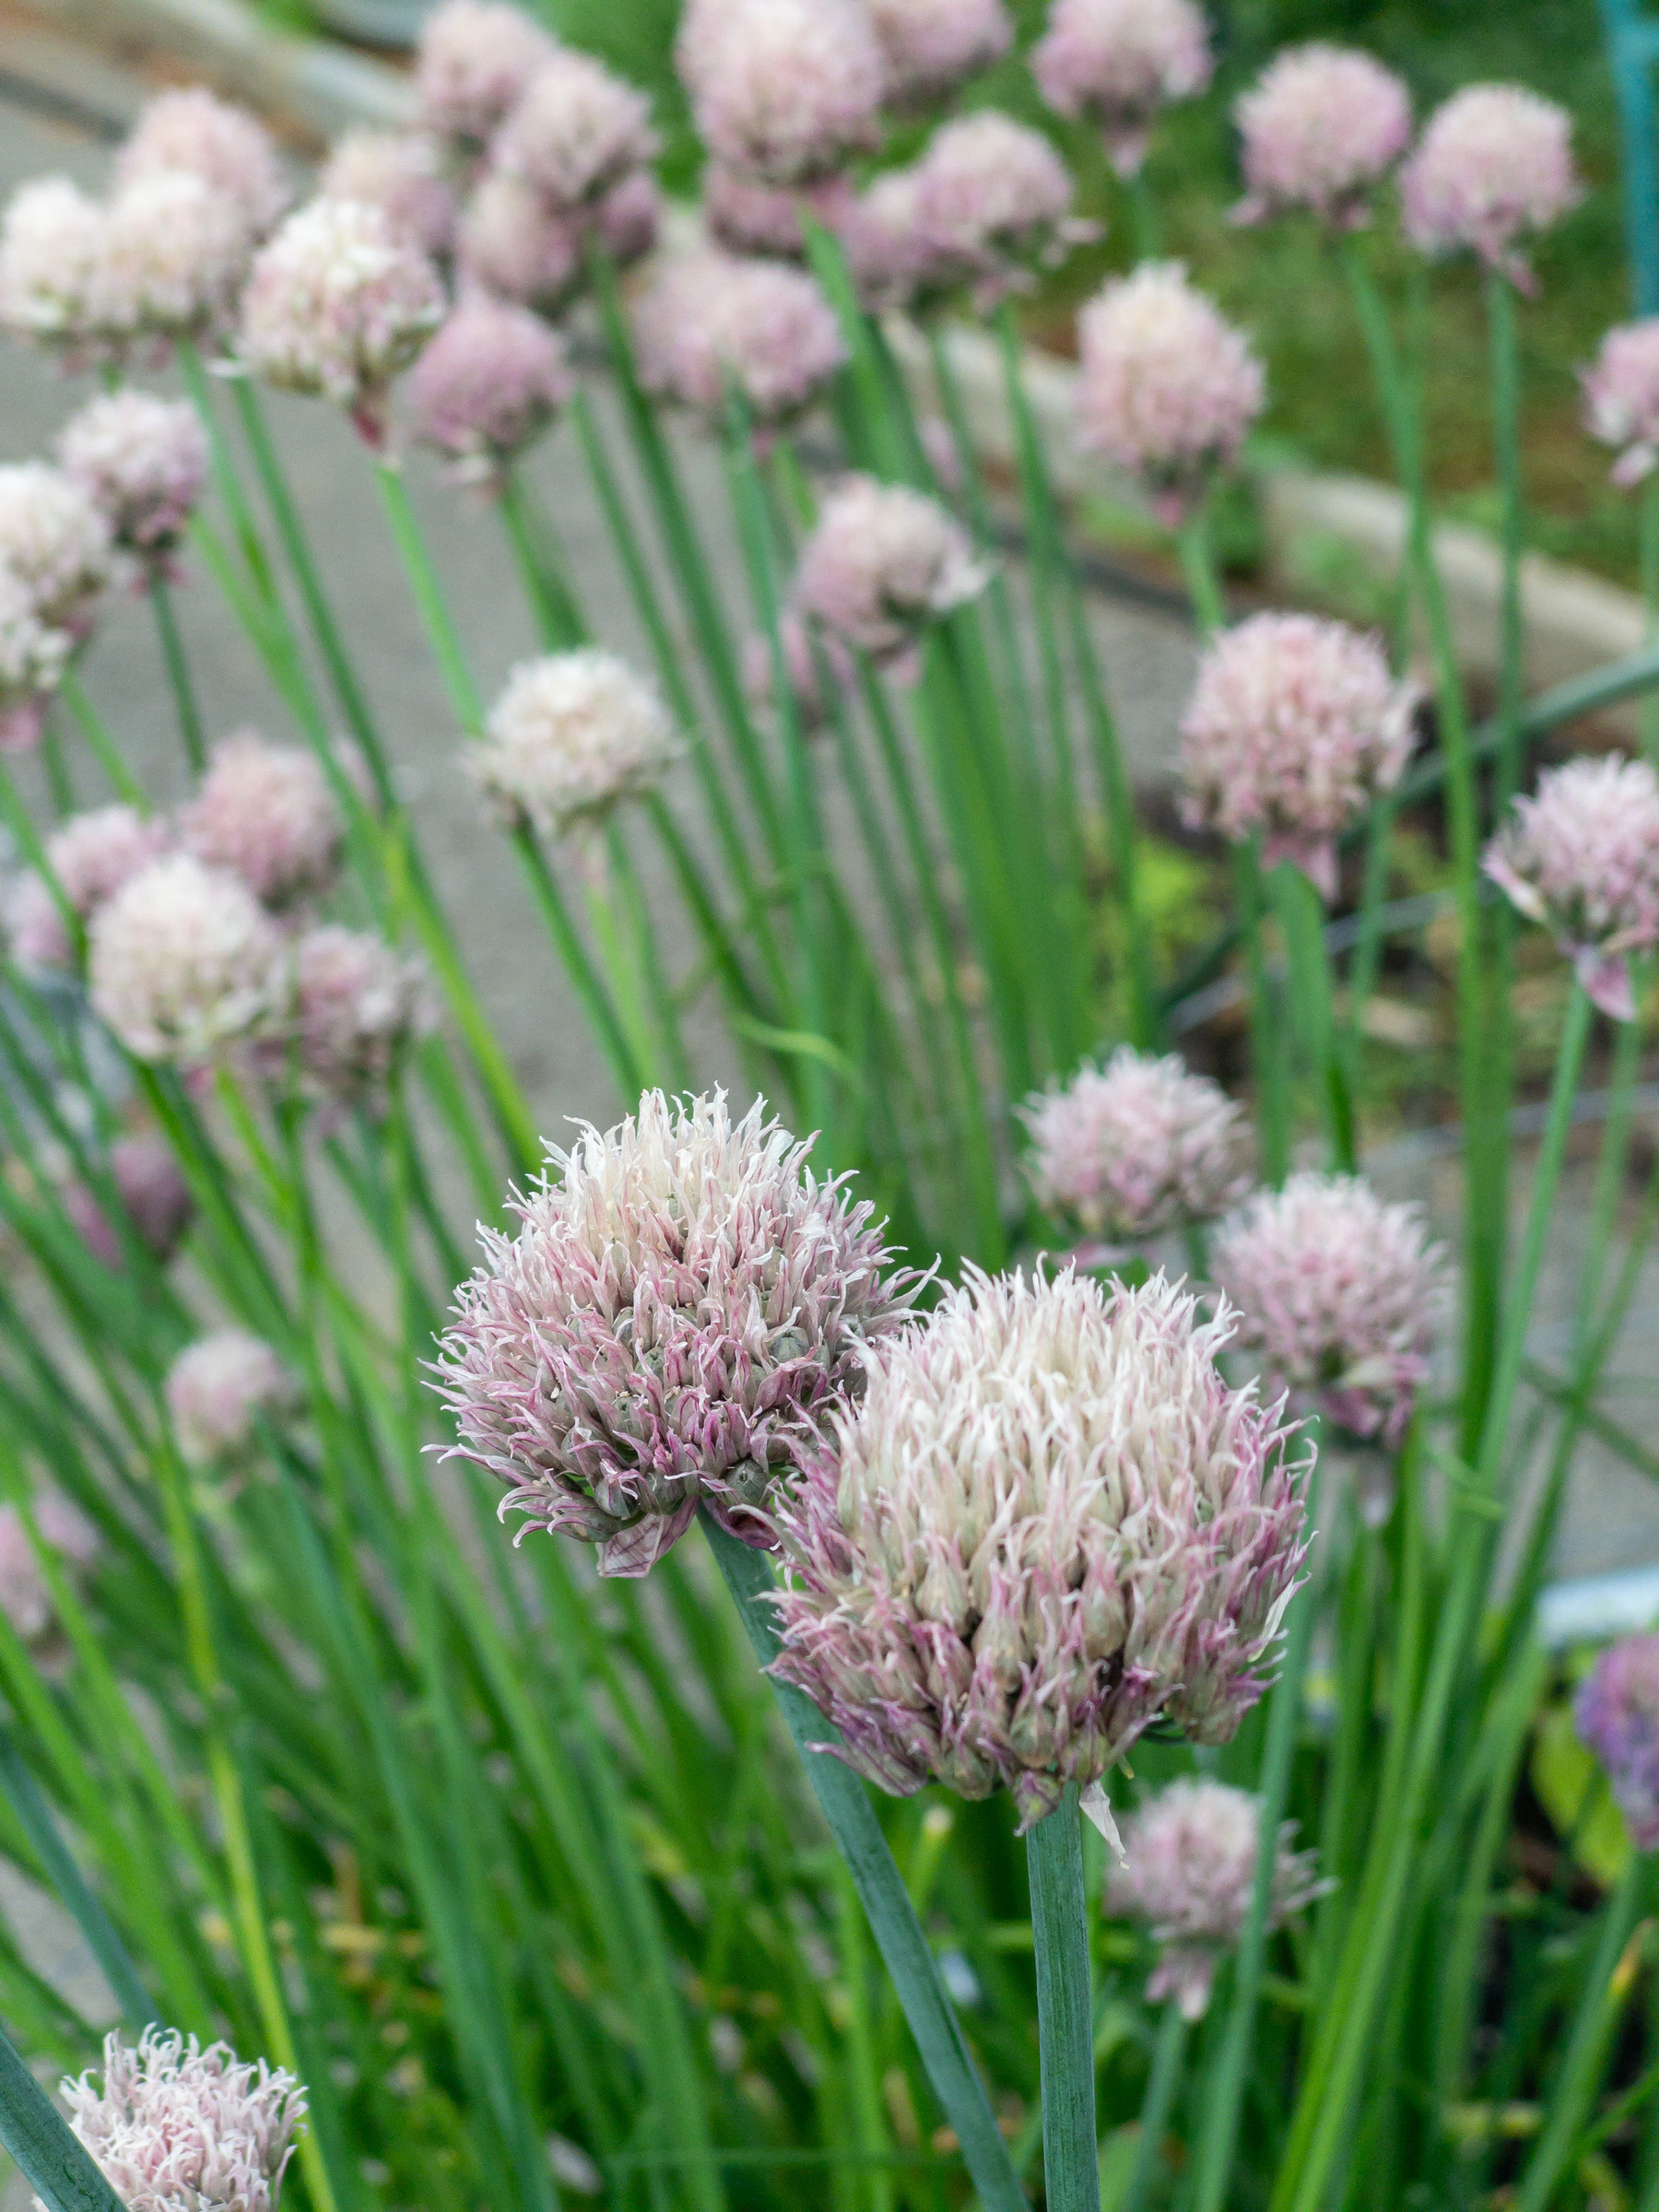 Chive blooms in our garden.